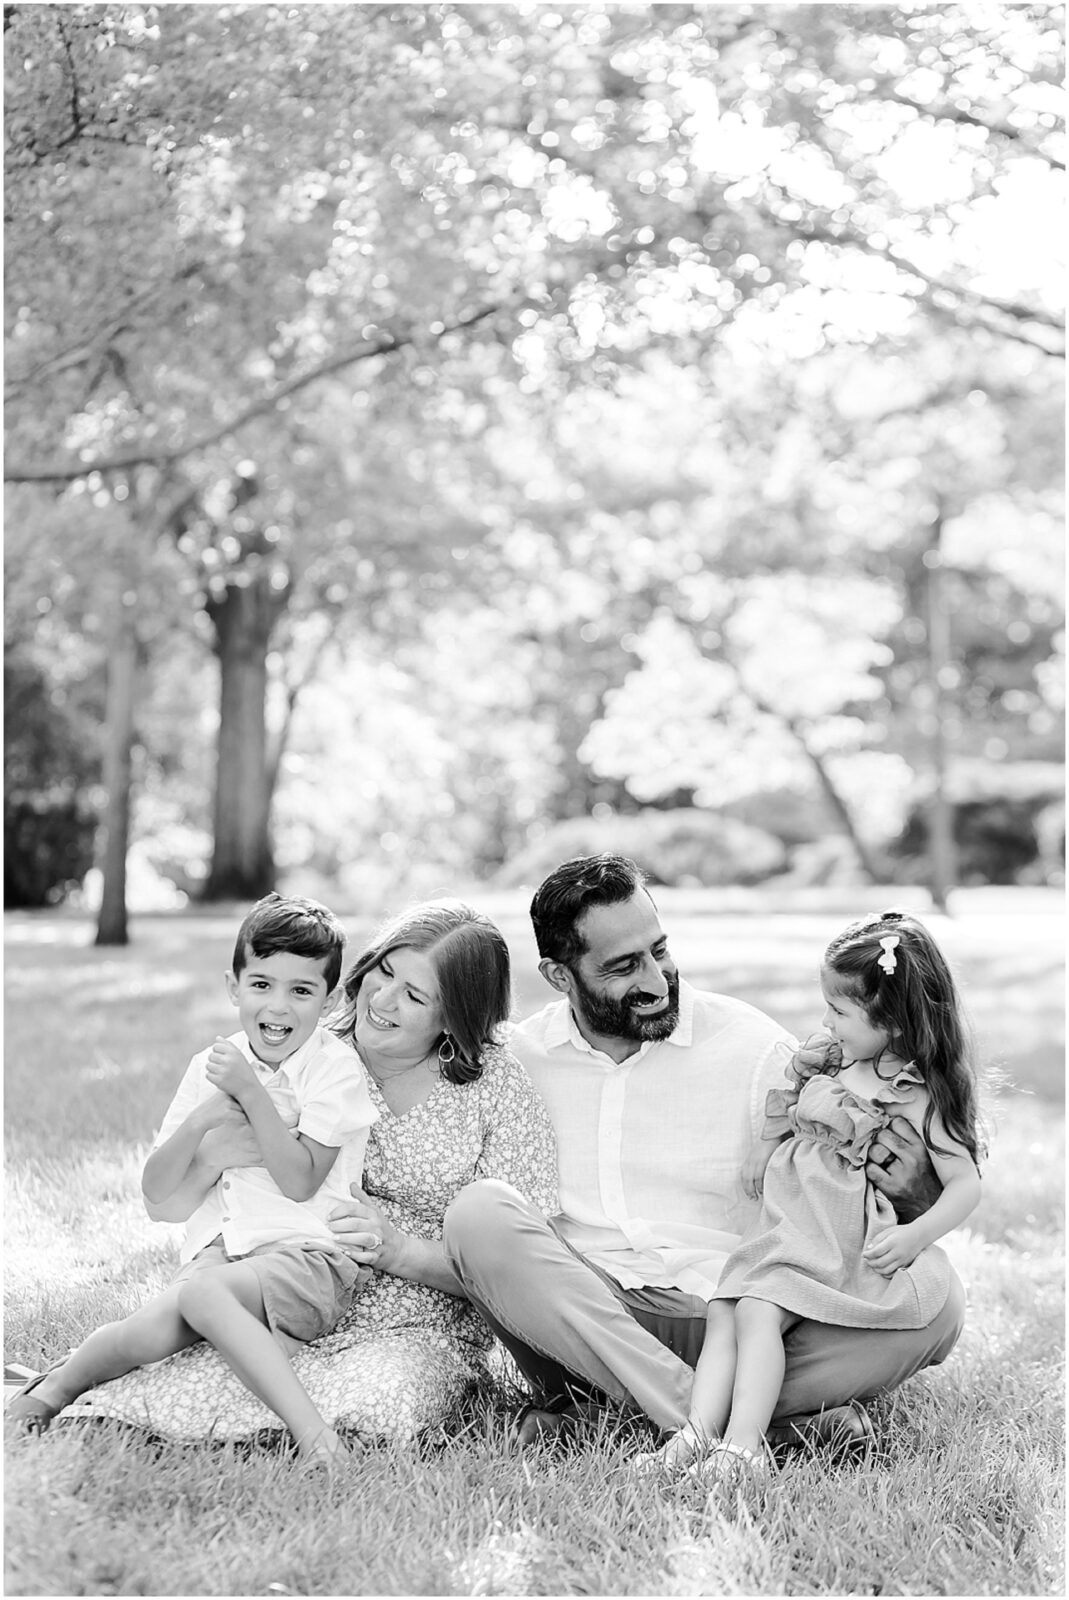 Kansas City Family Portrait Poses & Outfits Inspiration - multi generational family portraits - Overland Park based photographer - summer family photos outdoor